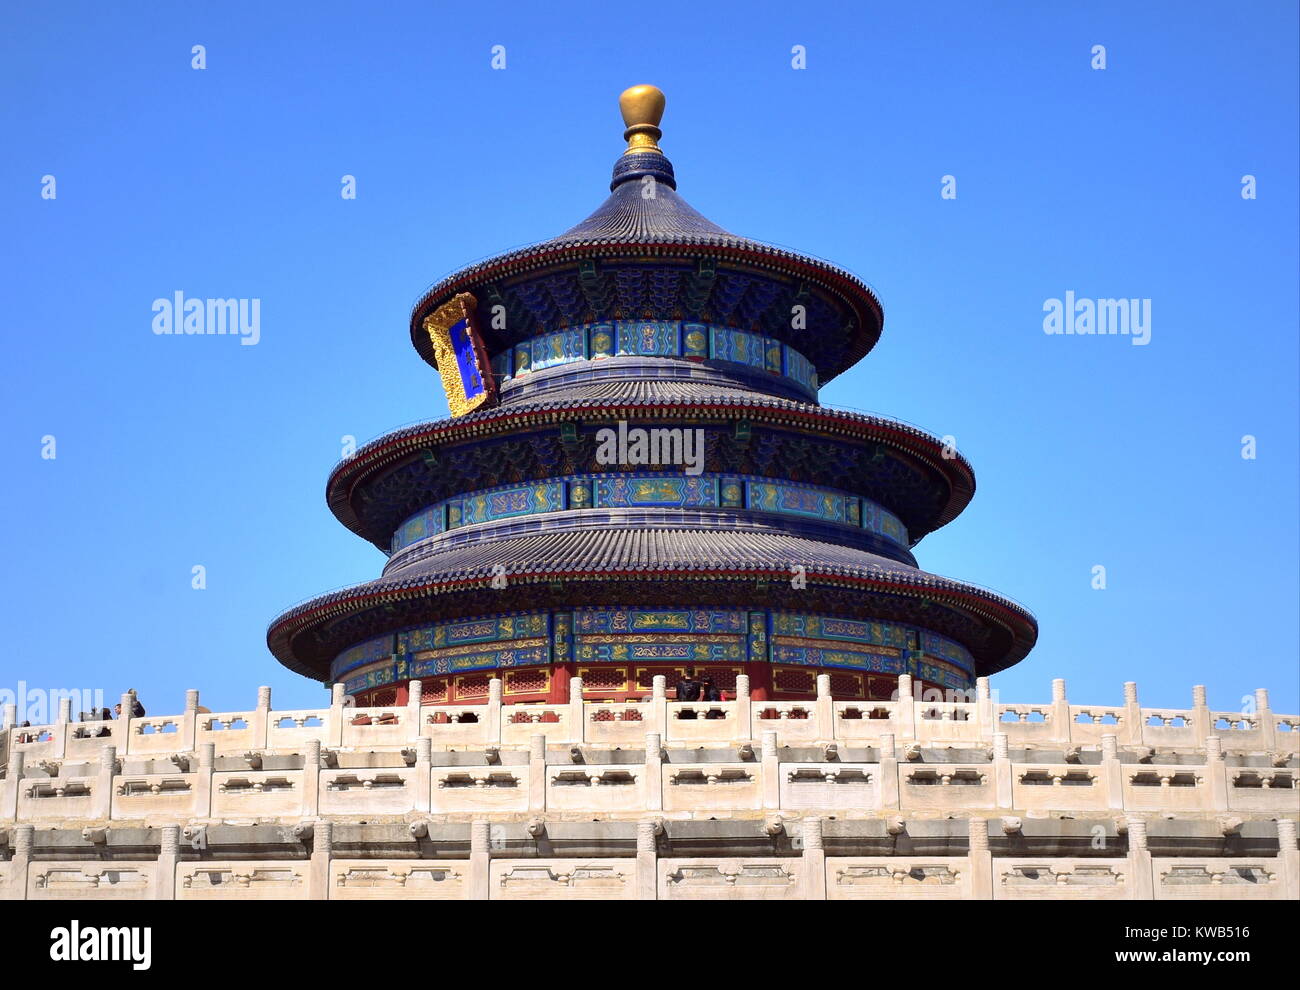 Temple of Heaven under Beijing clean blue sky - side view Stock Photo